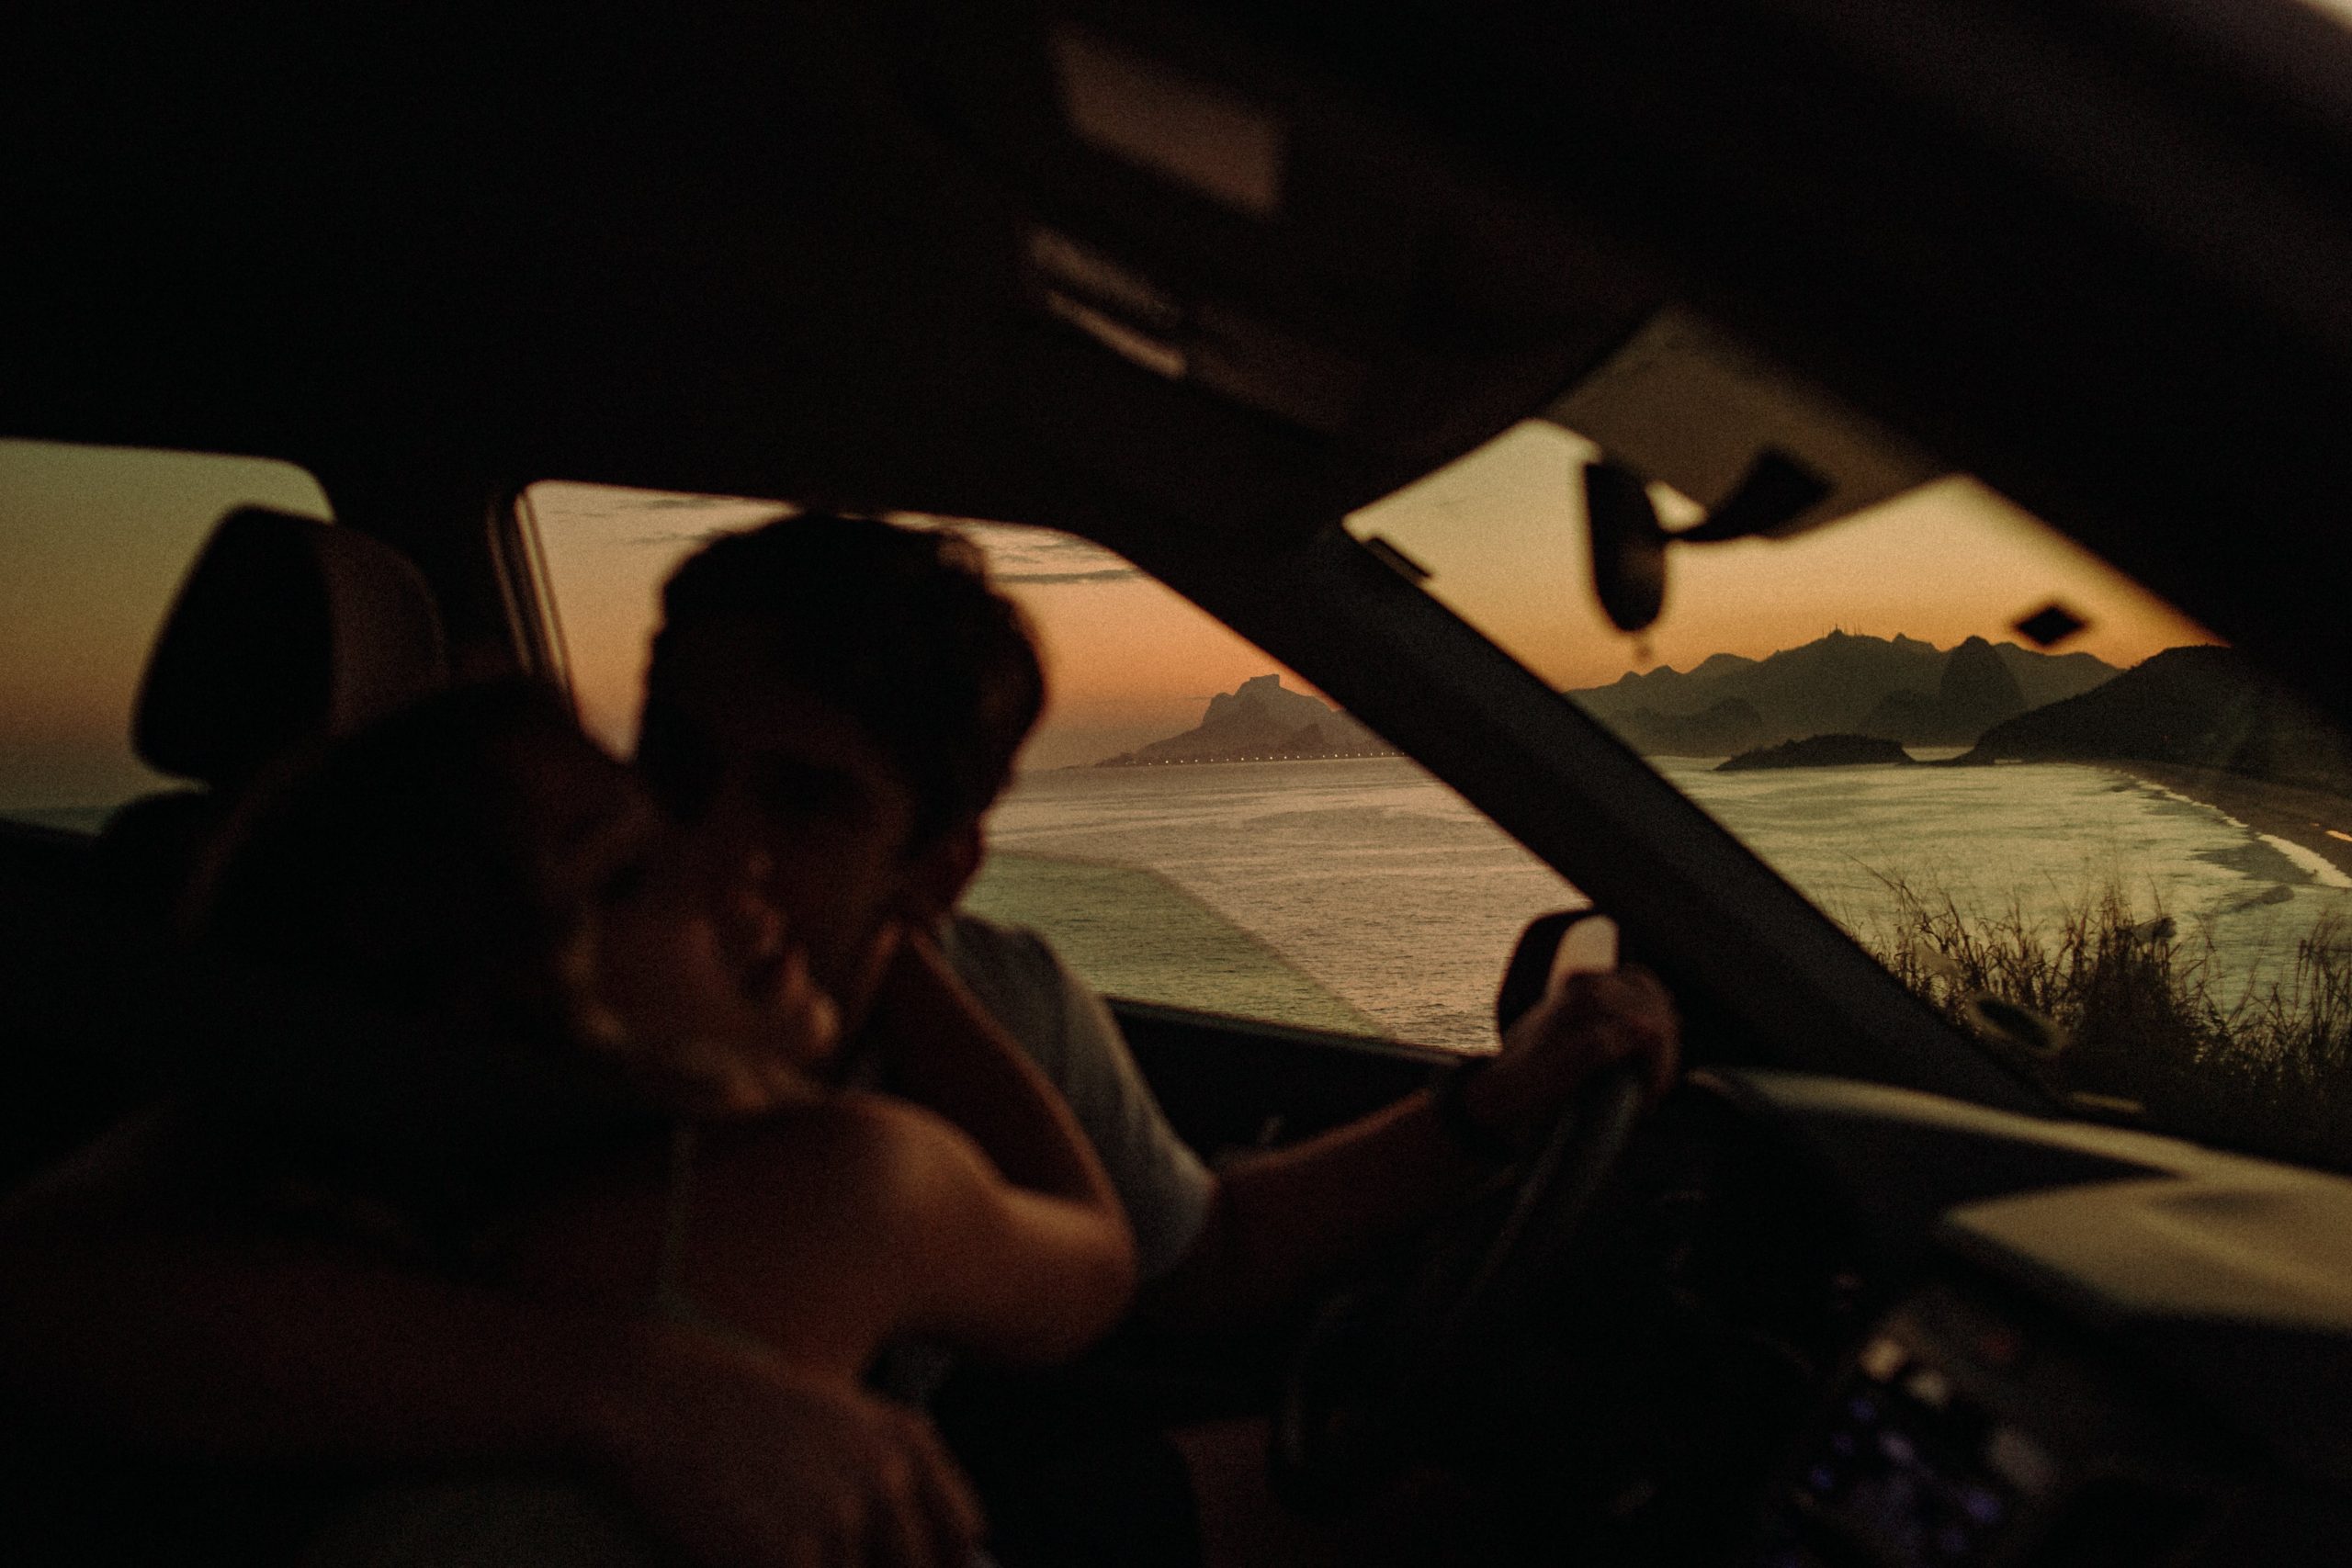 A couple sitting in a car, kissing each other on the cheeks under the rays of the setting sun.